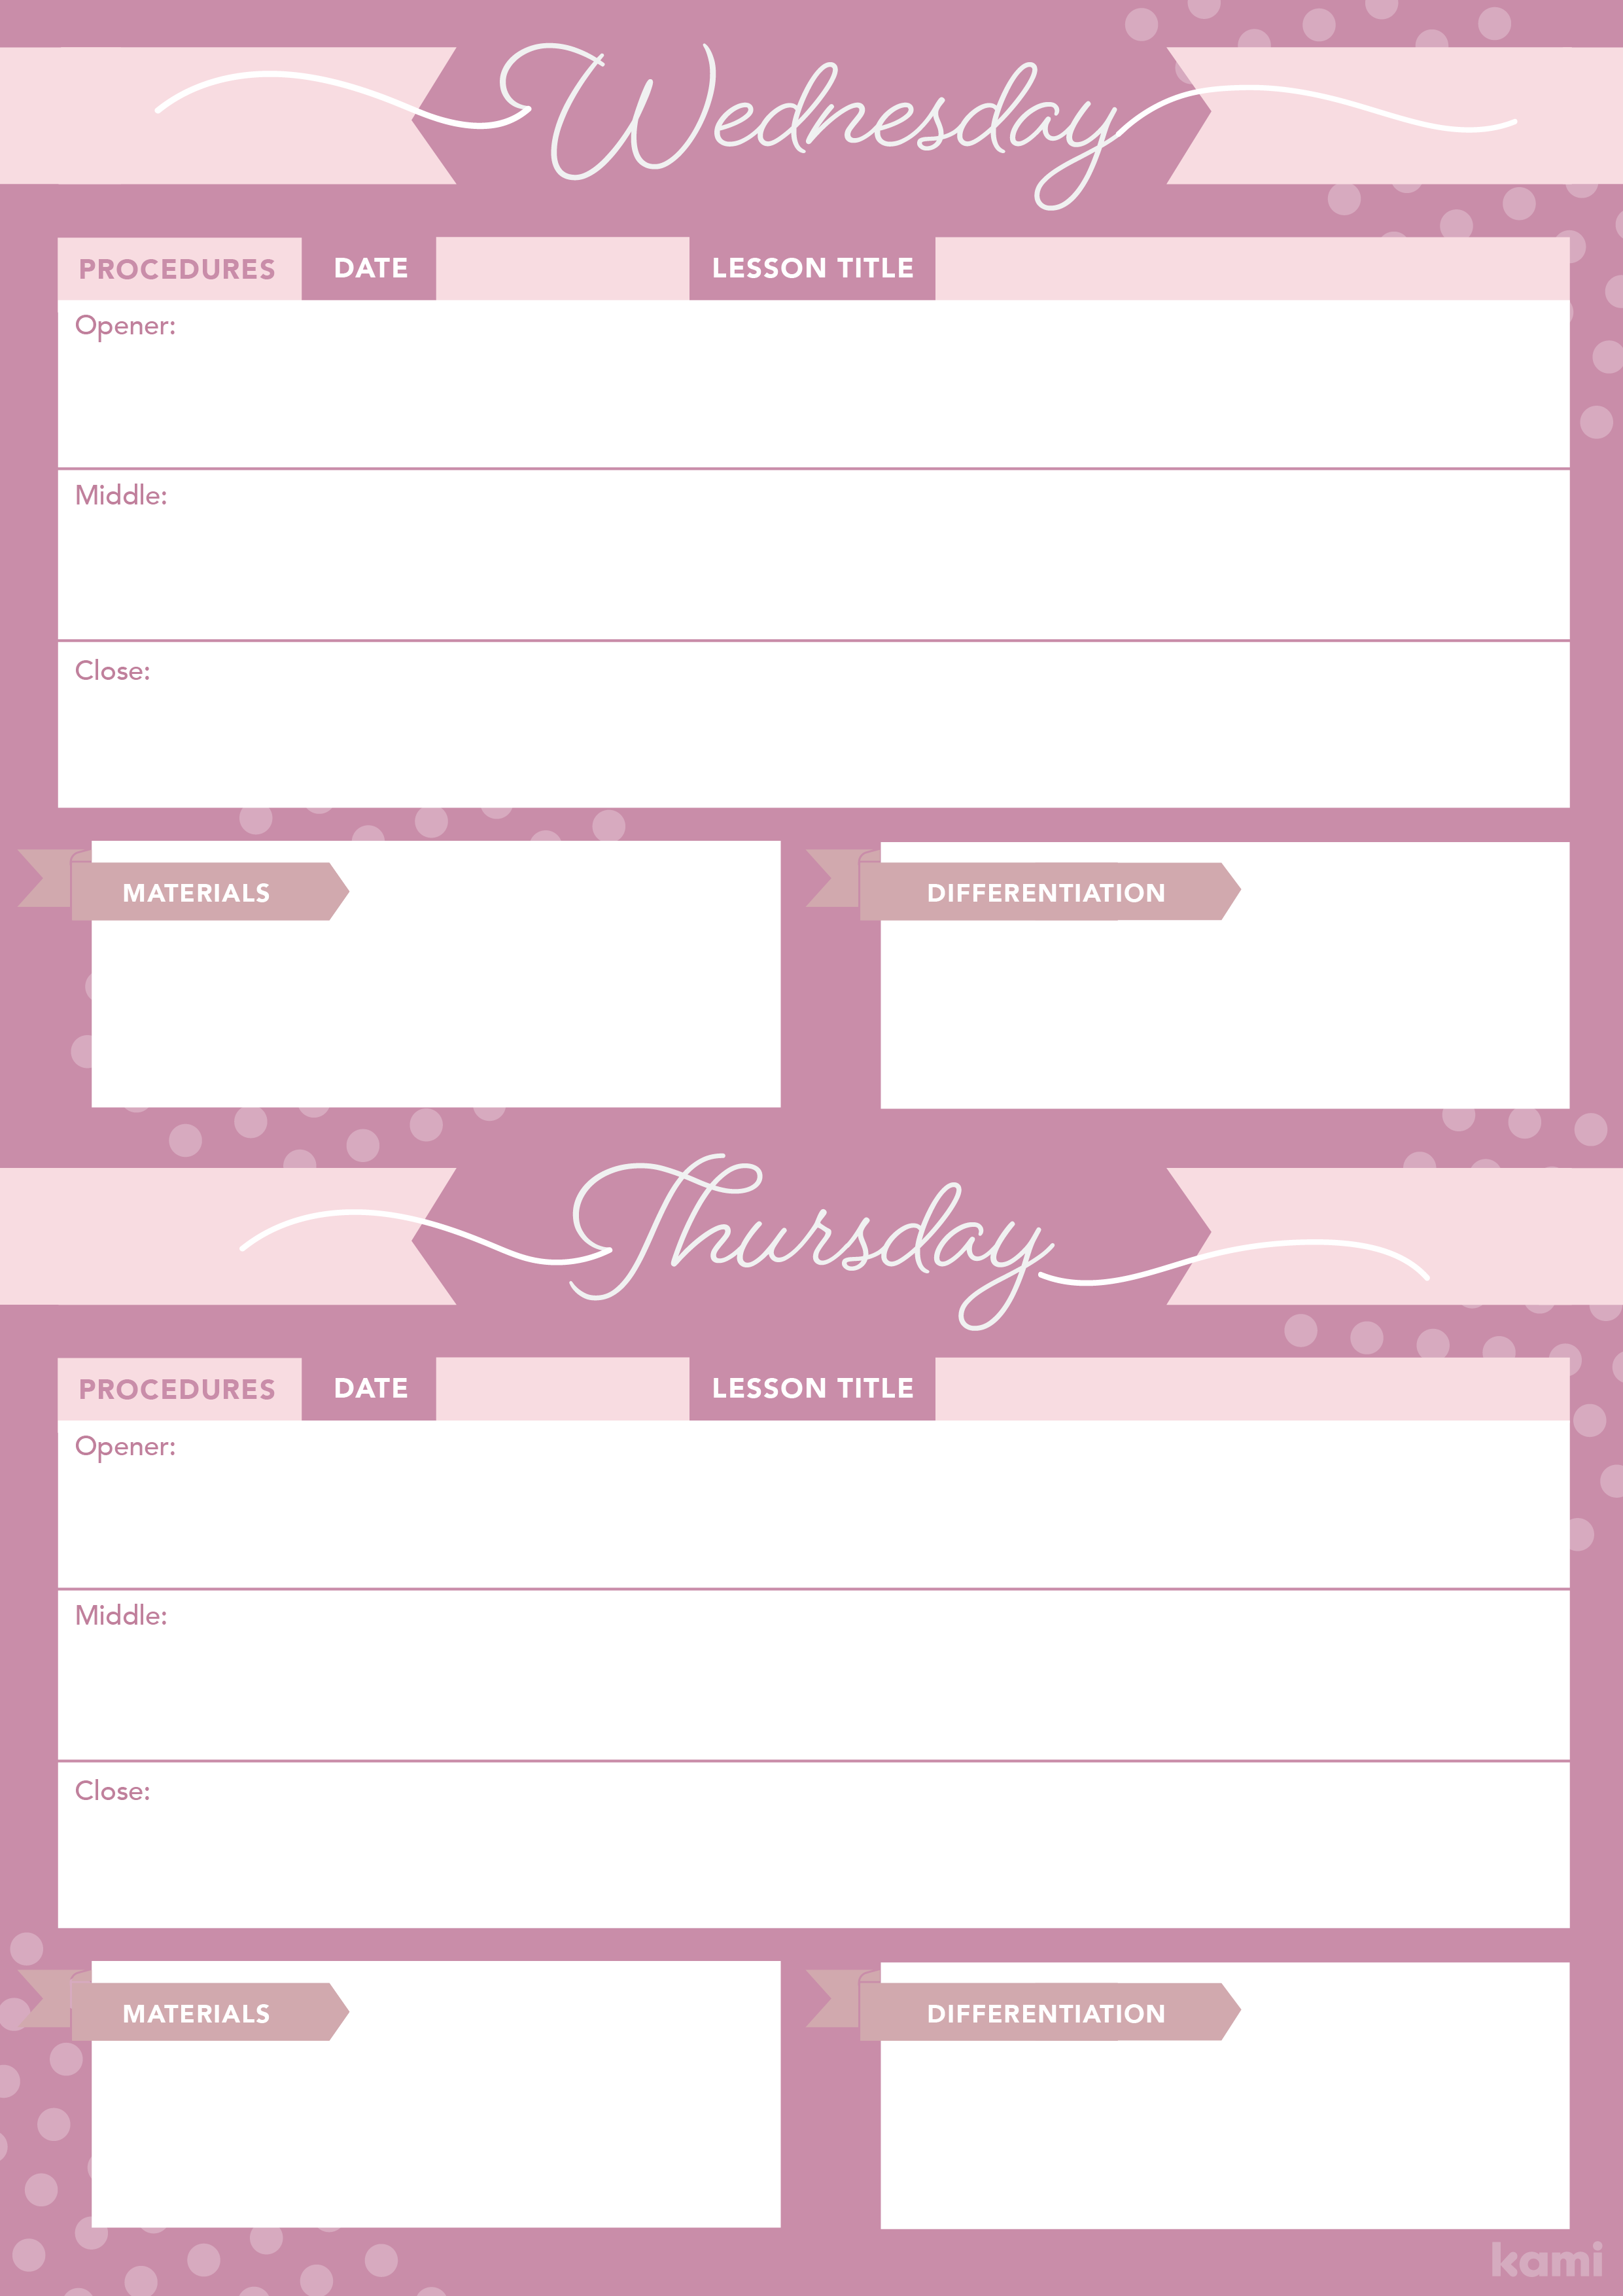 A Weekly Overview Lesson Plan for Teachers with a Pink Theme